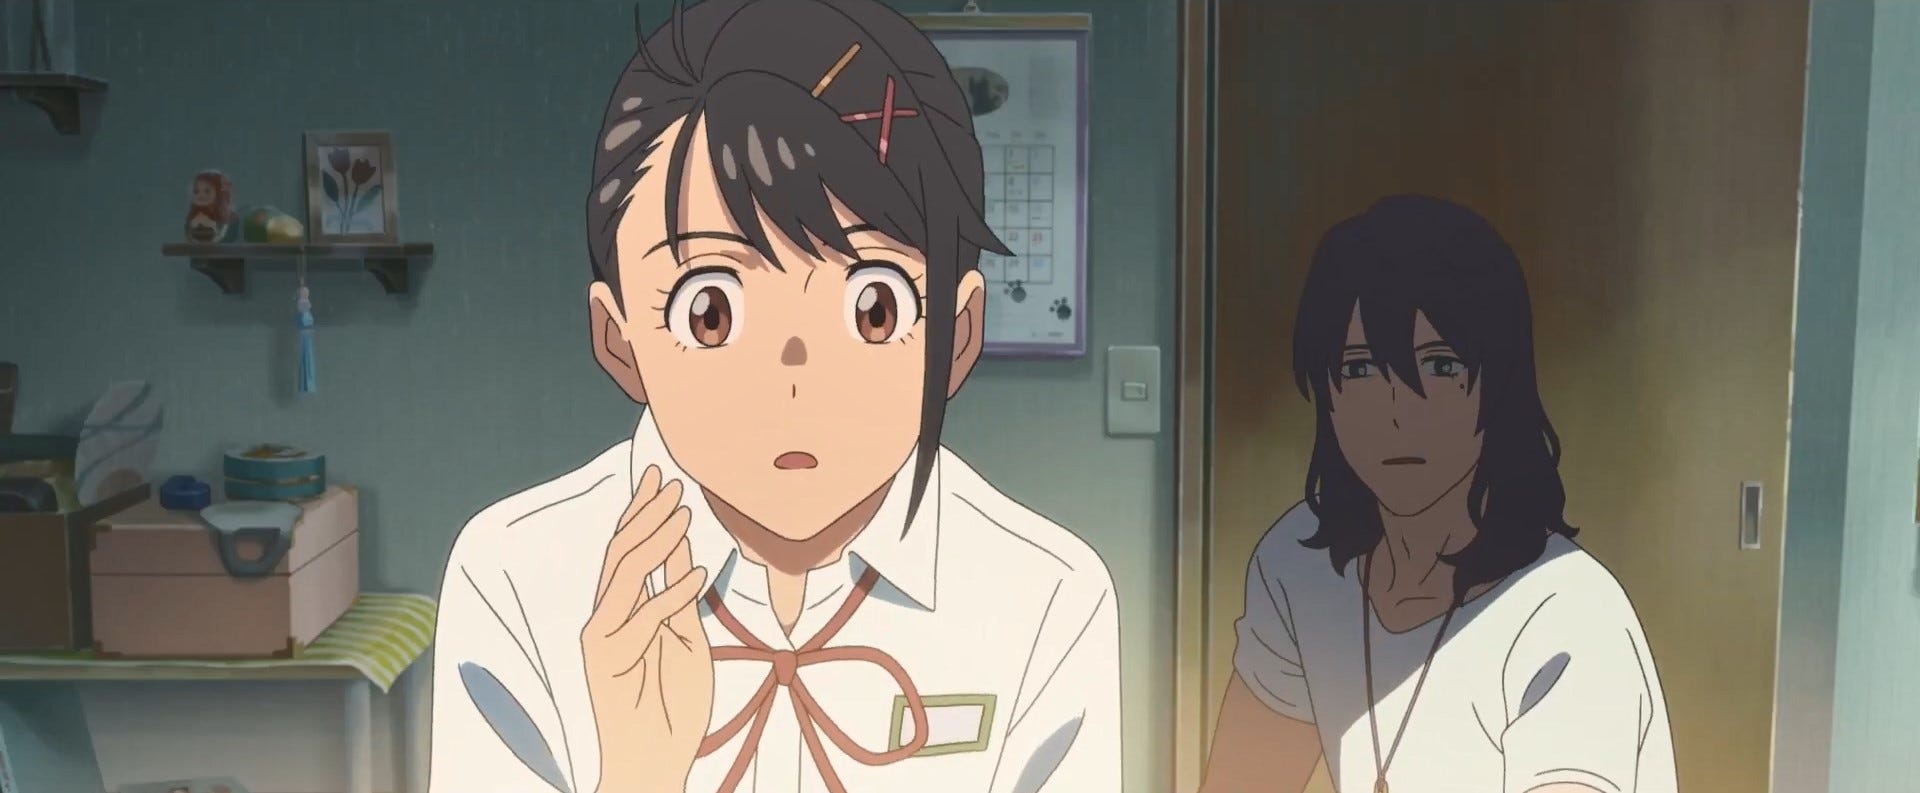 Your Name' Director's New Anime Has A Girl Romancing A Chair